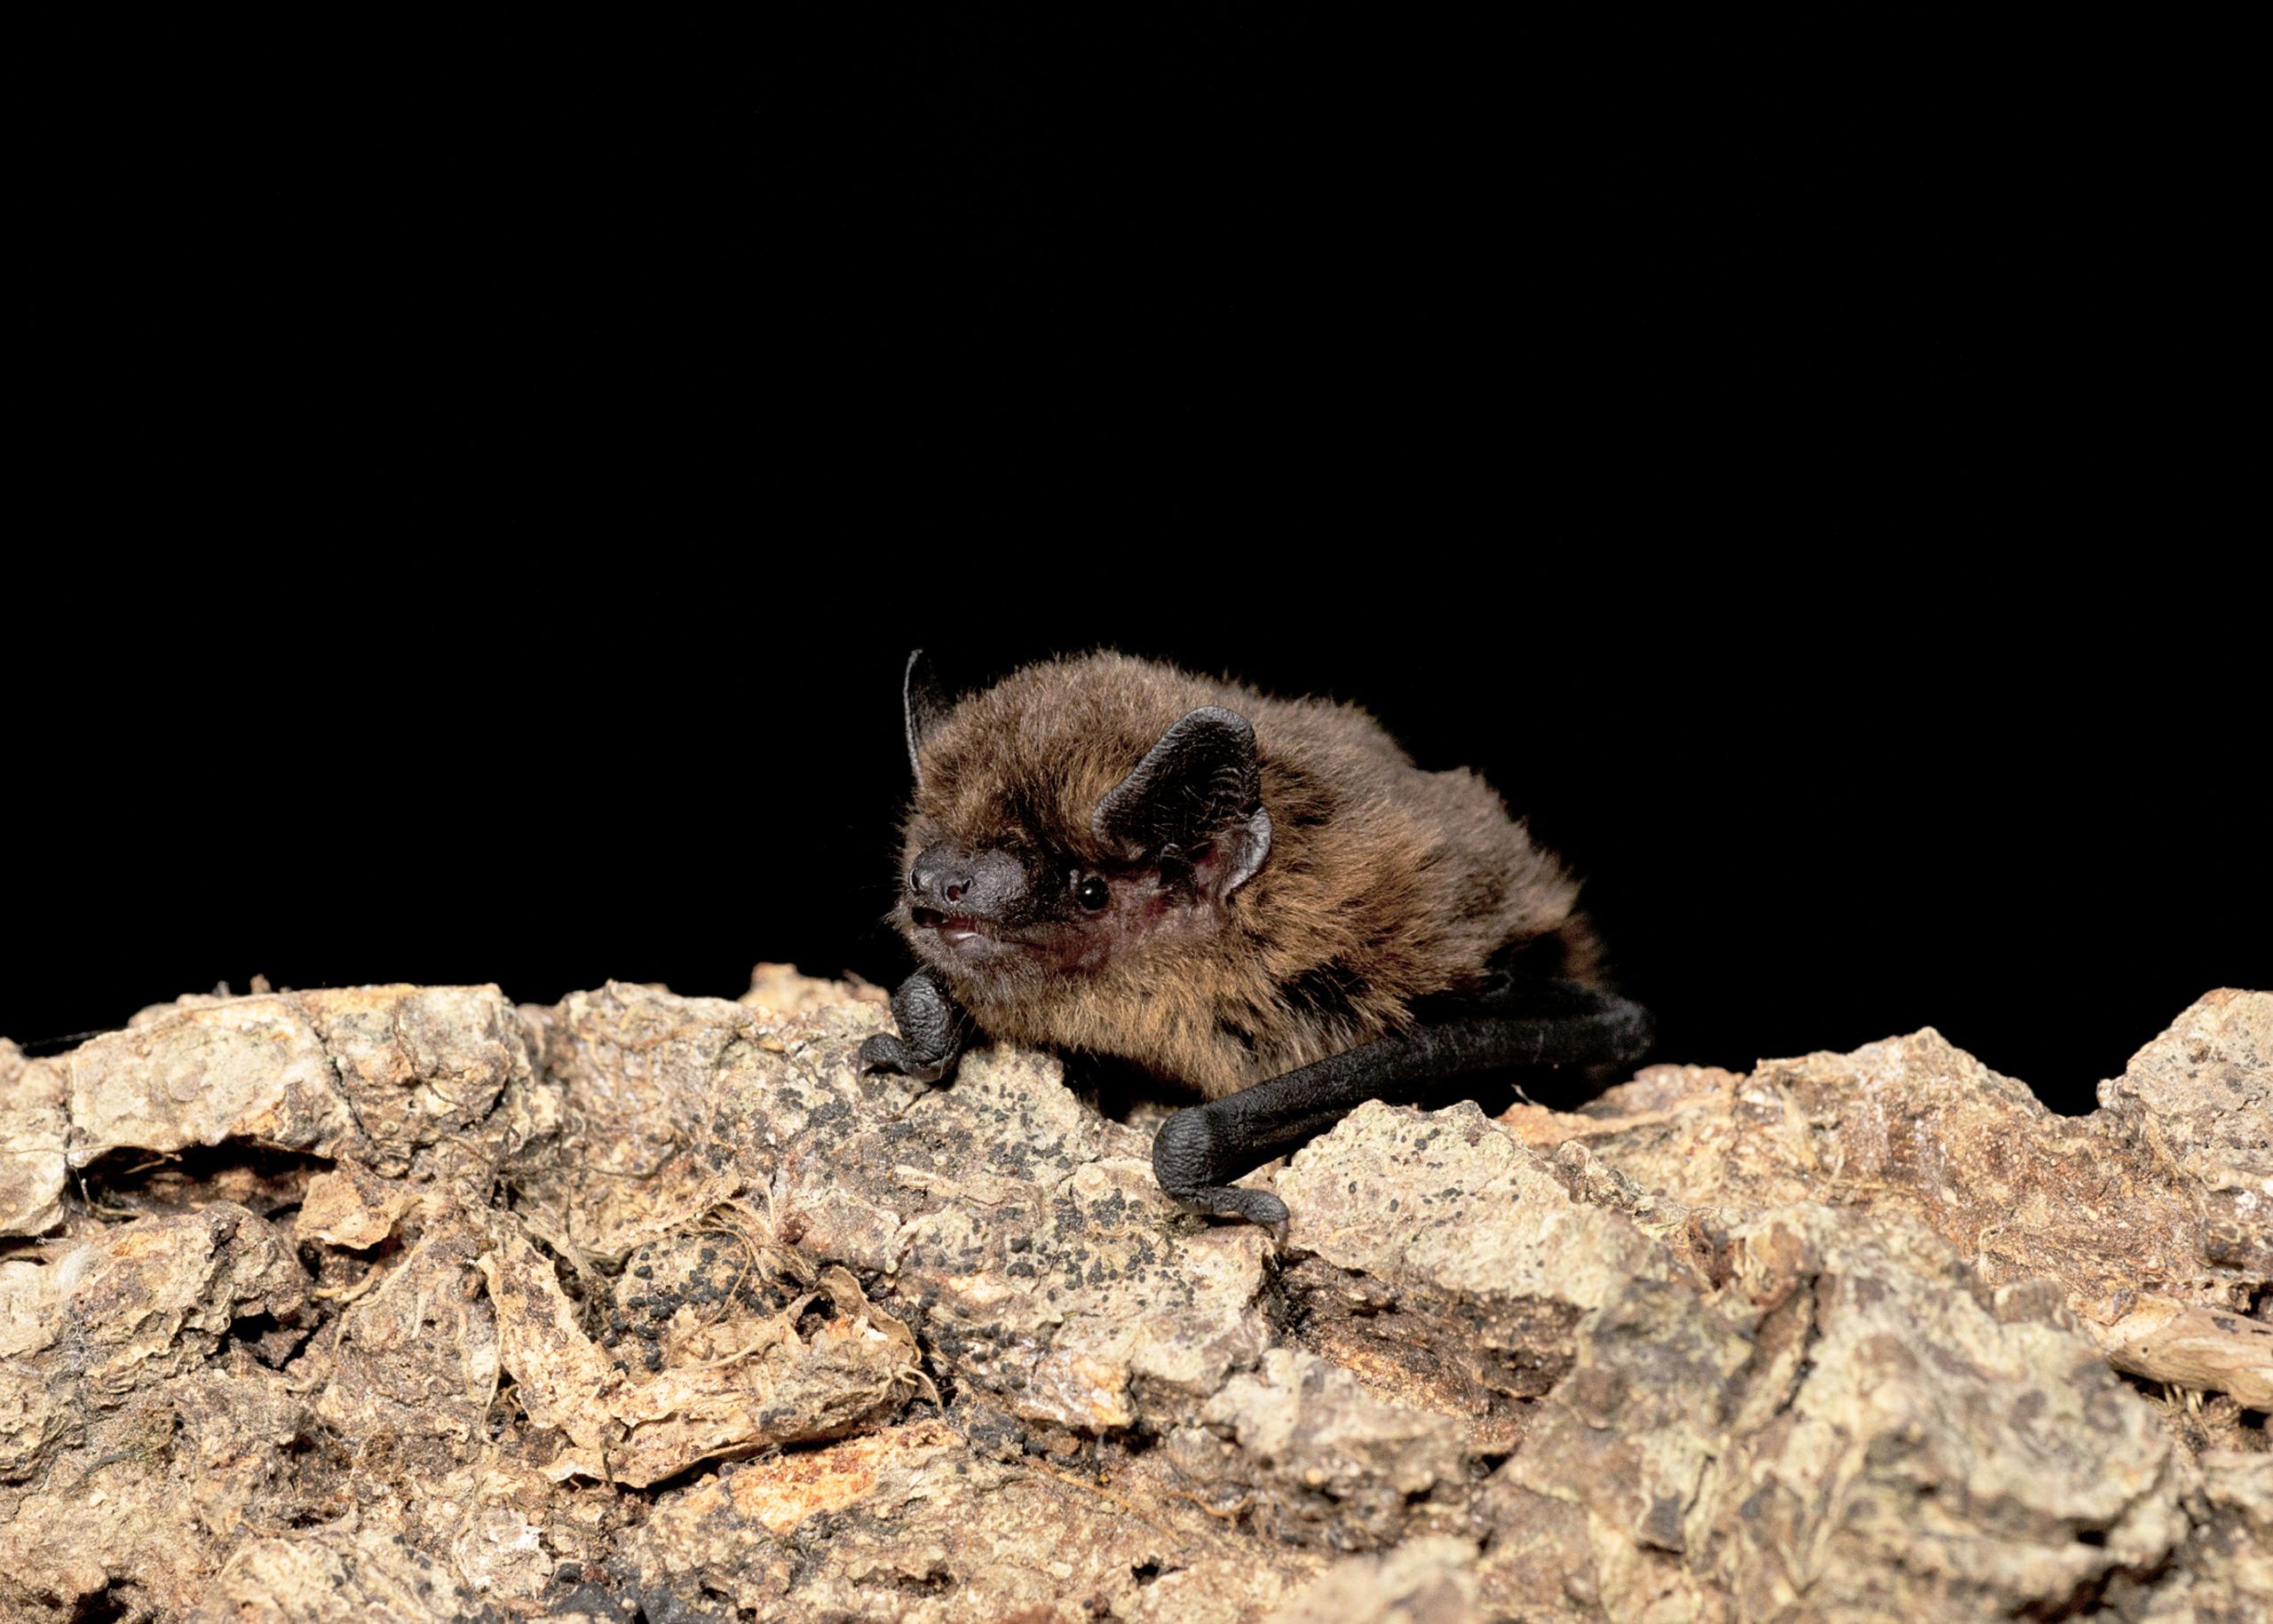 Image of a common pipistrelle bat resting upon bark with a black background.